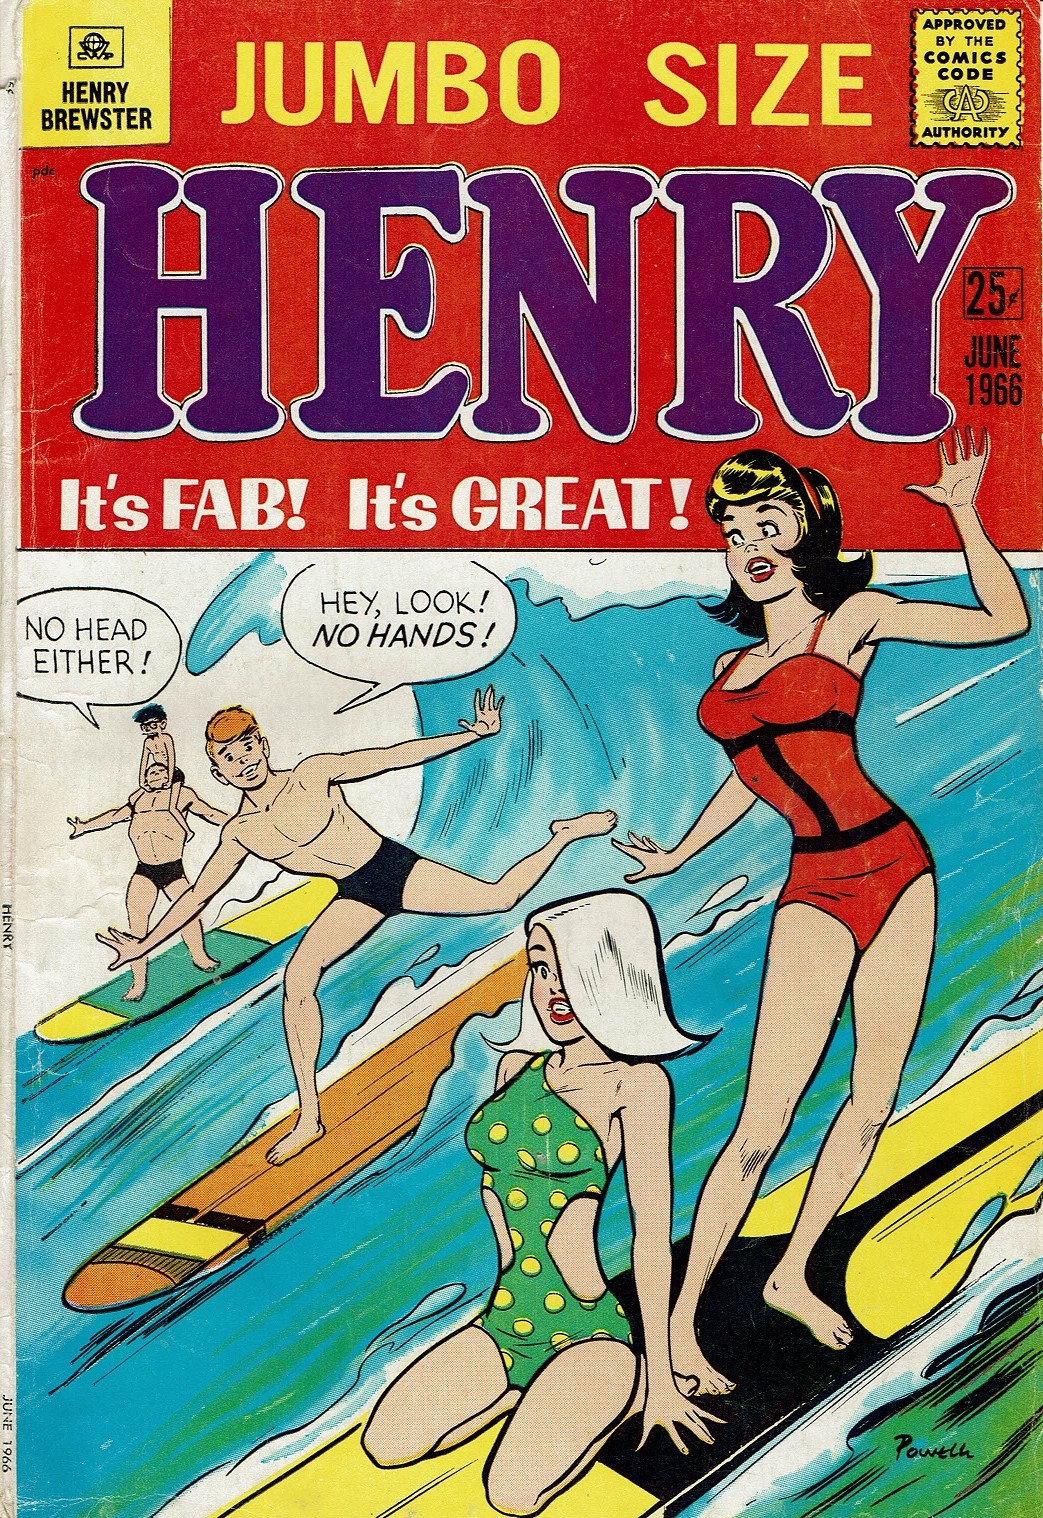 Read online Henry Brewster comic -  Issue #3 - 1